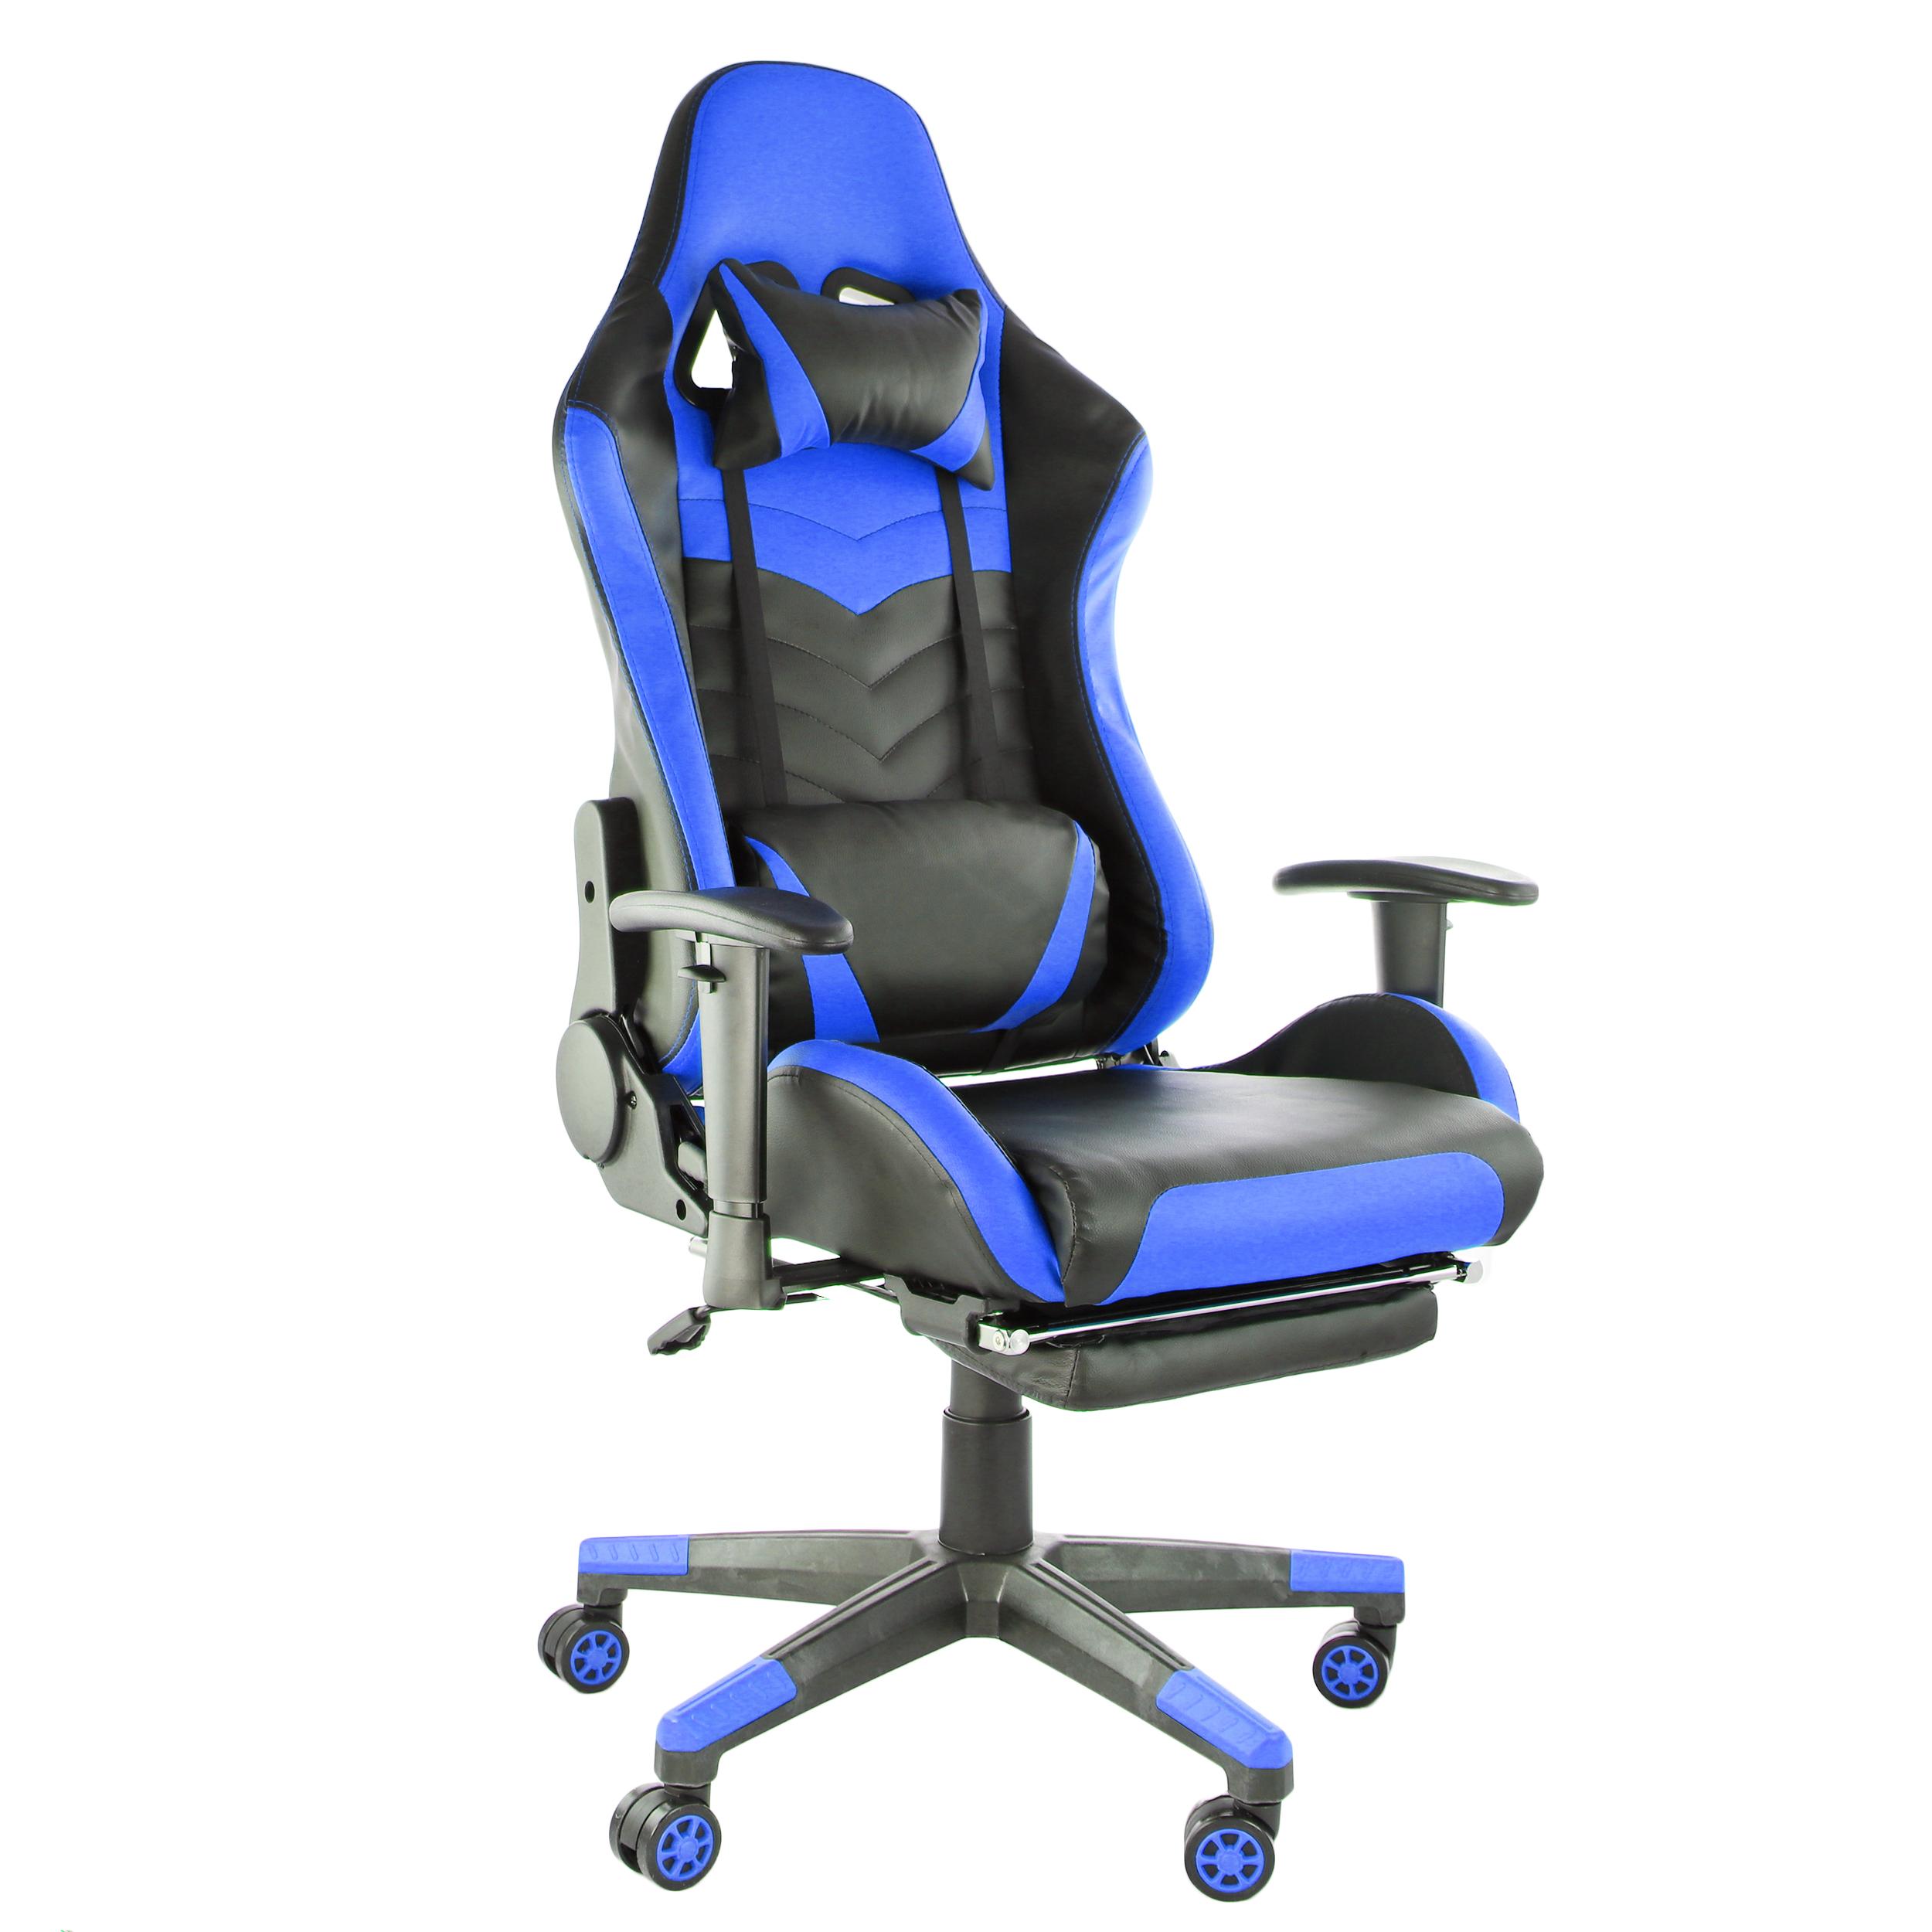 Gamefits: Gaming Chairs, Gaming Controllers, Accessories and Chargers